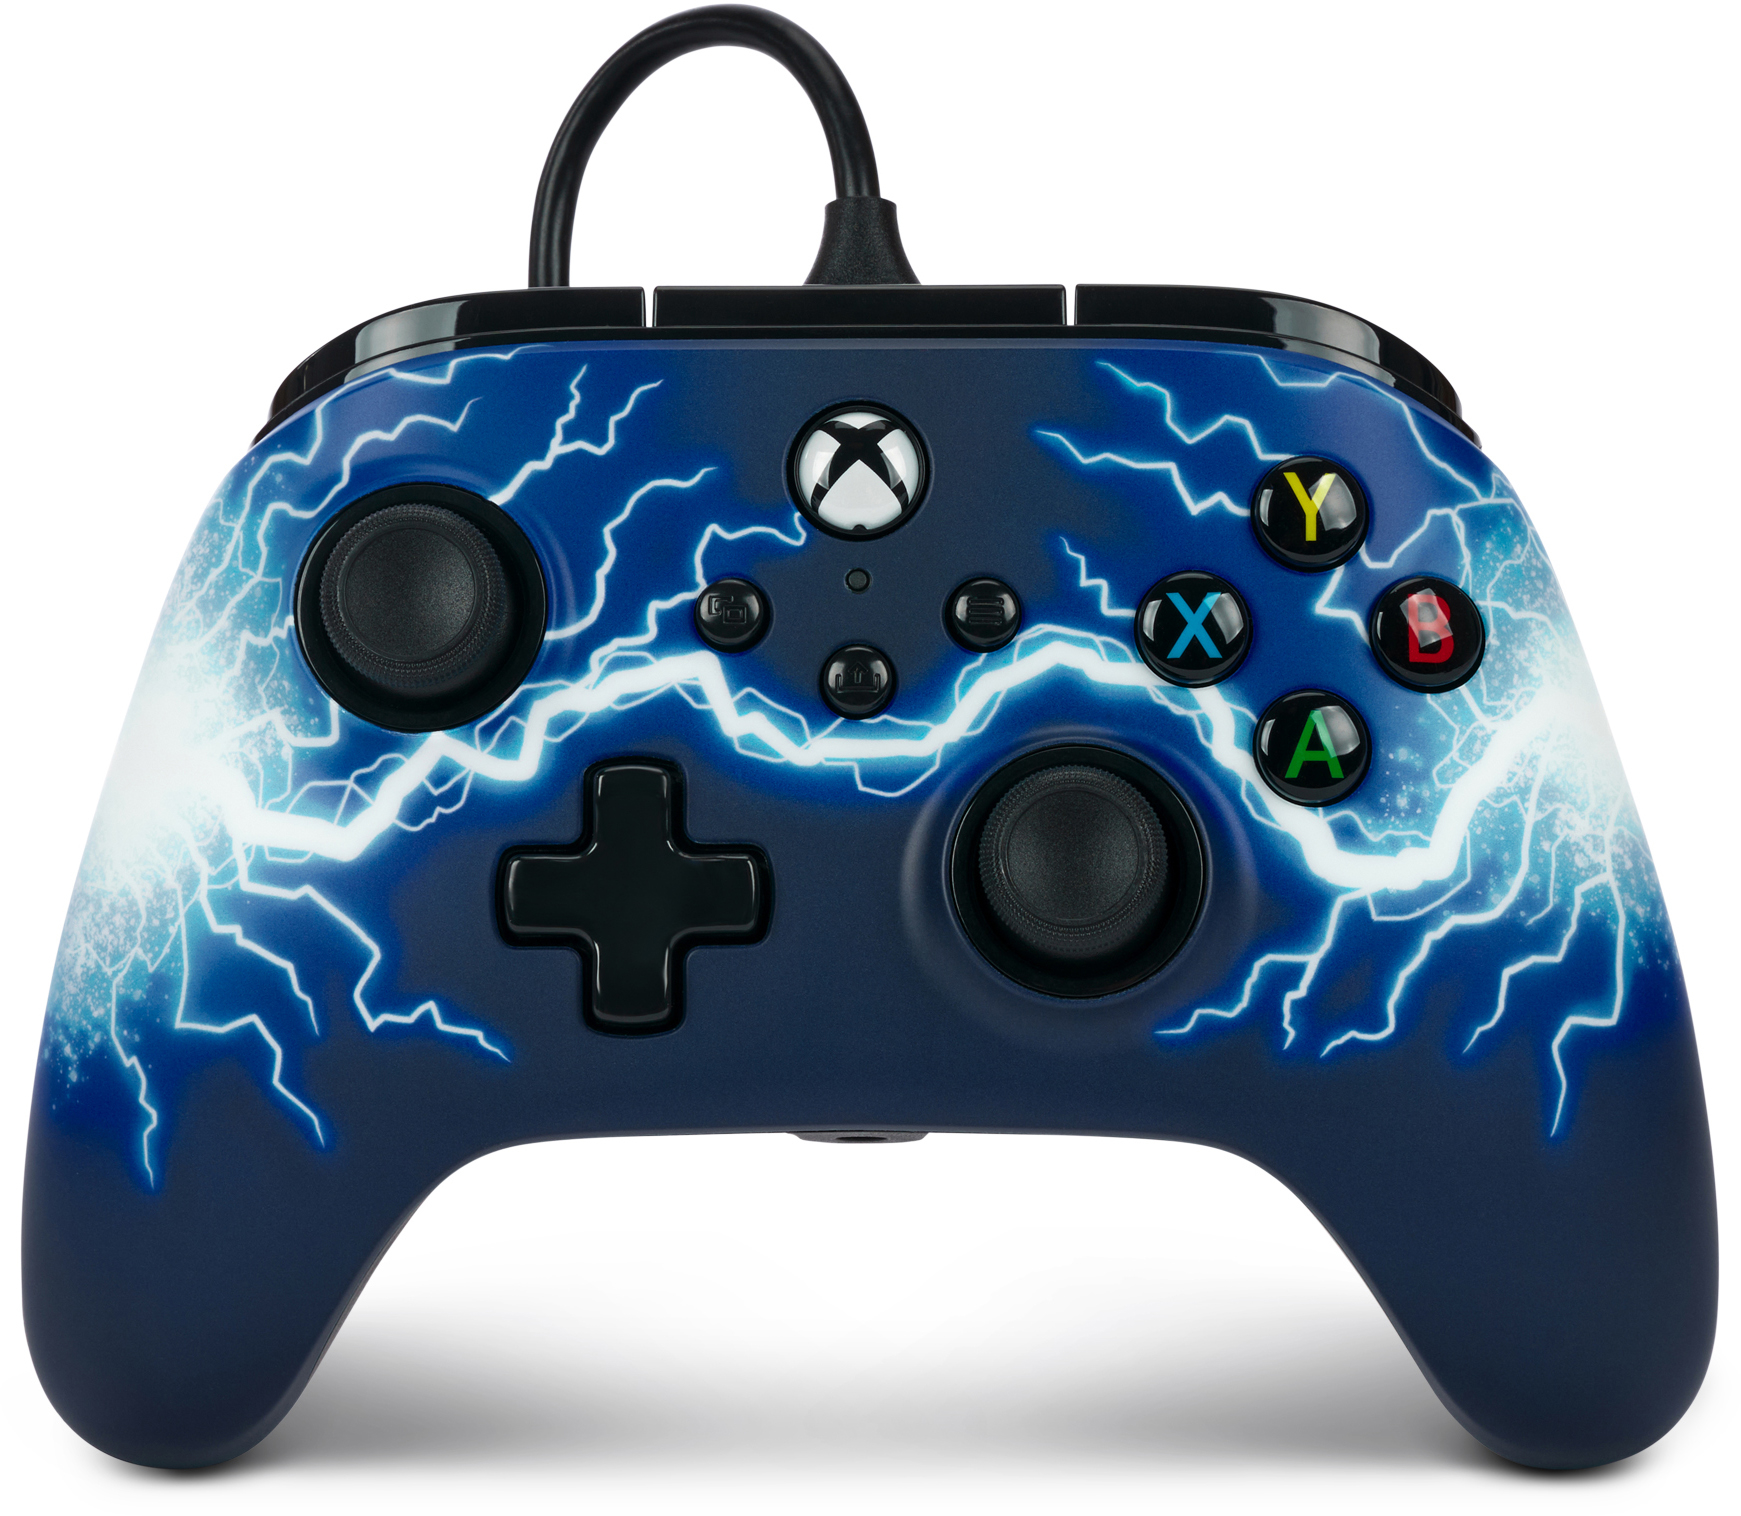 POWER A Advantage Wired Controller XBGP0169-01 Xbox Series X/S,Arclightning